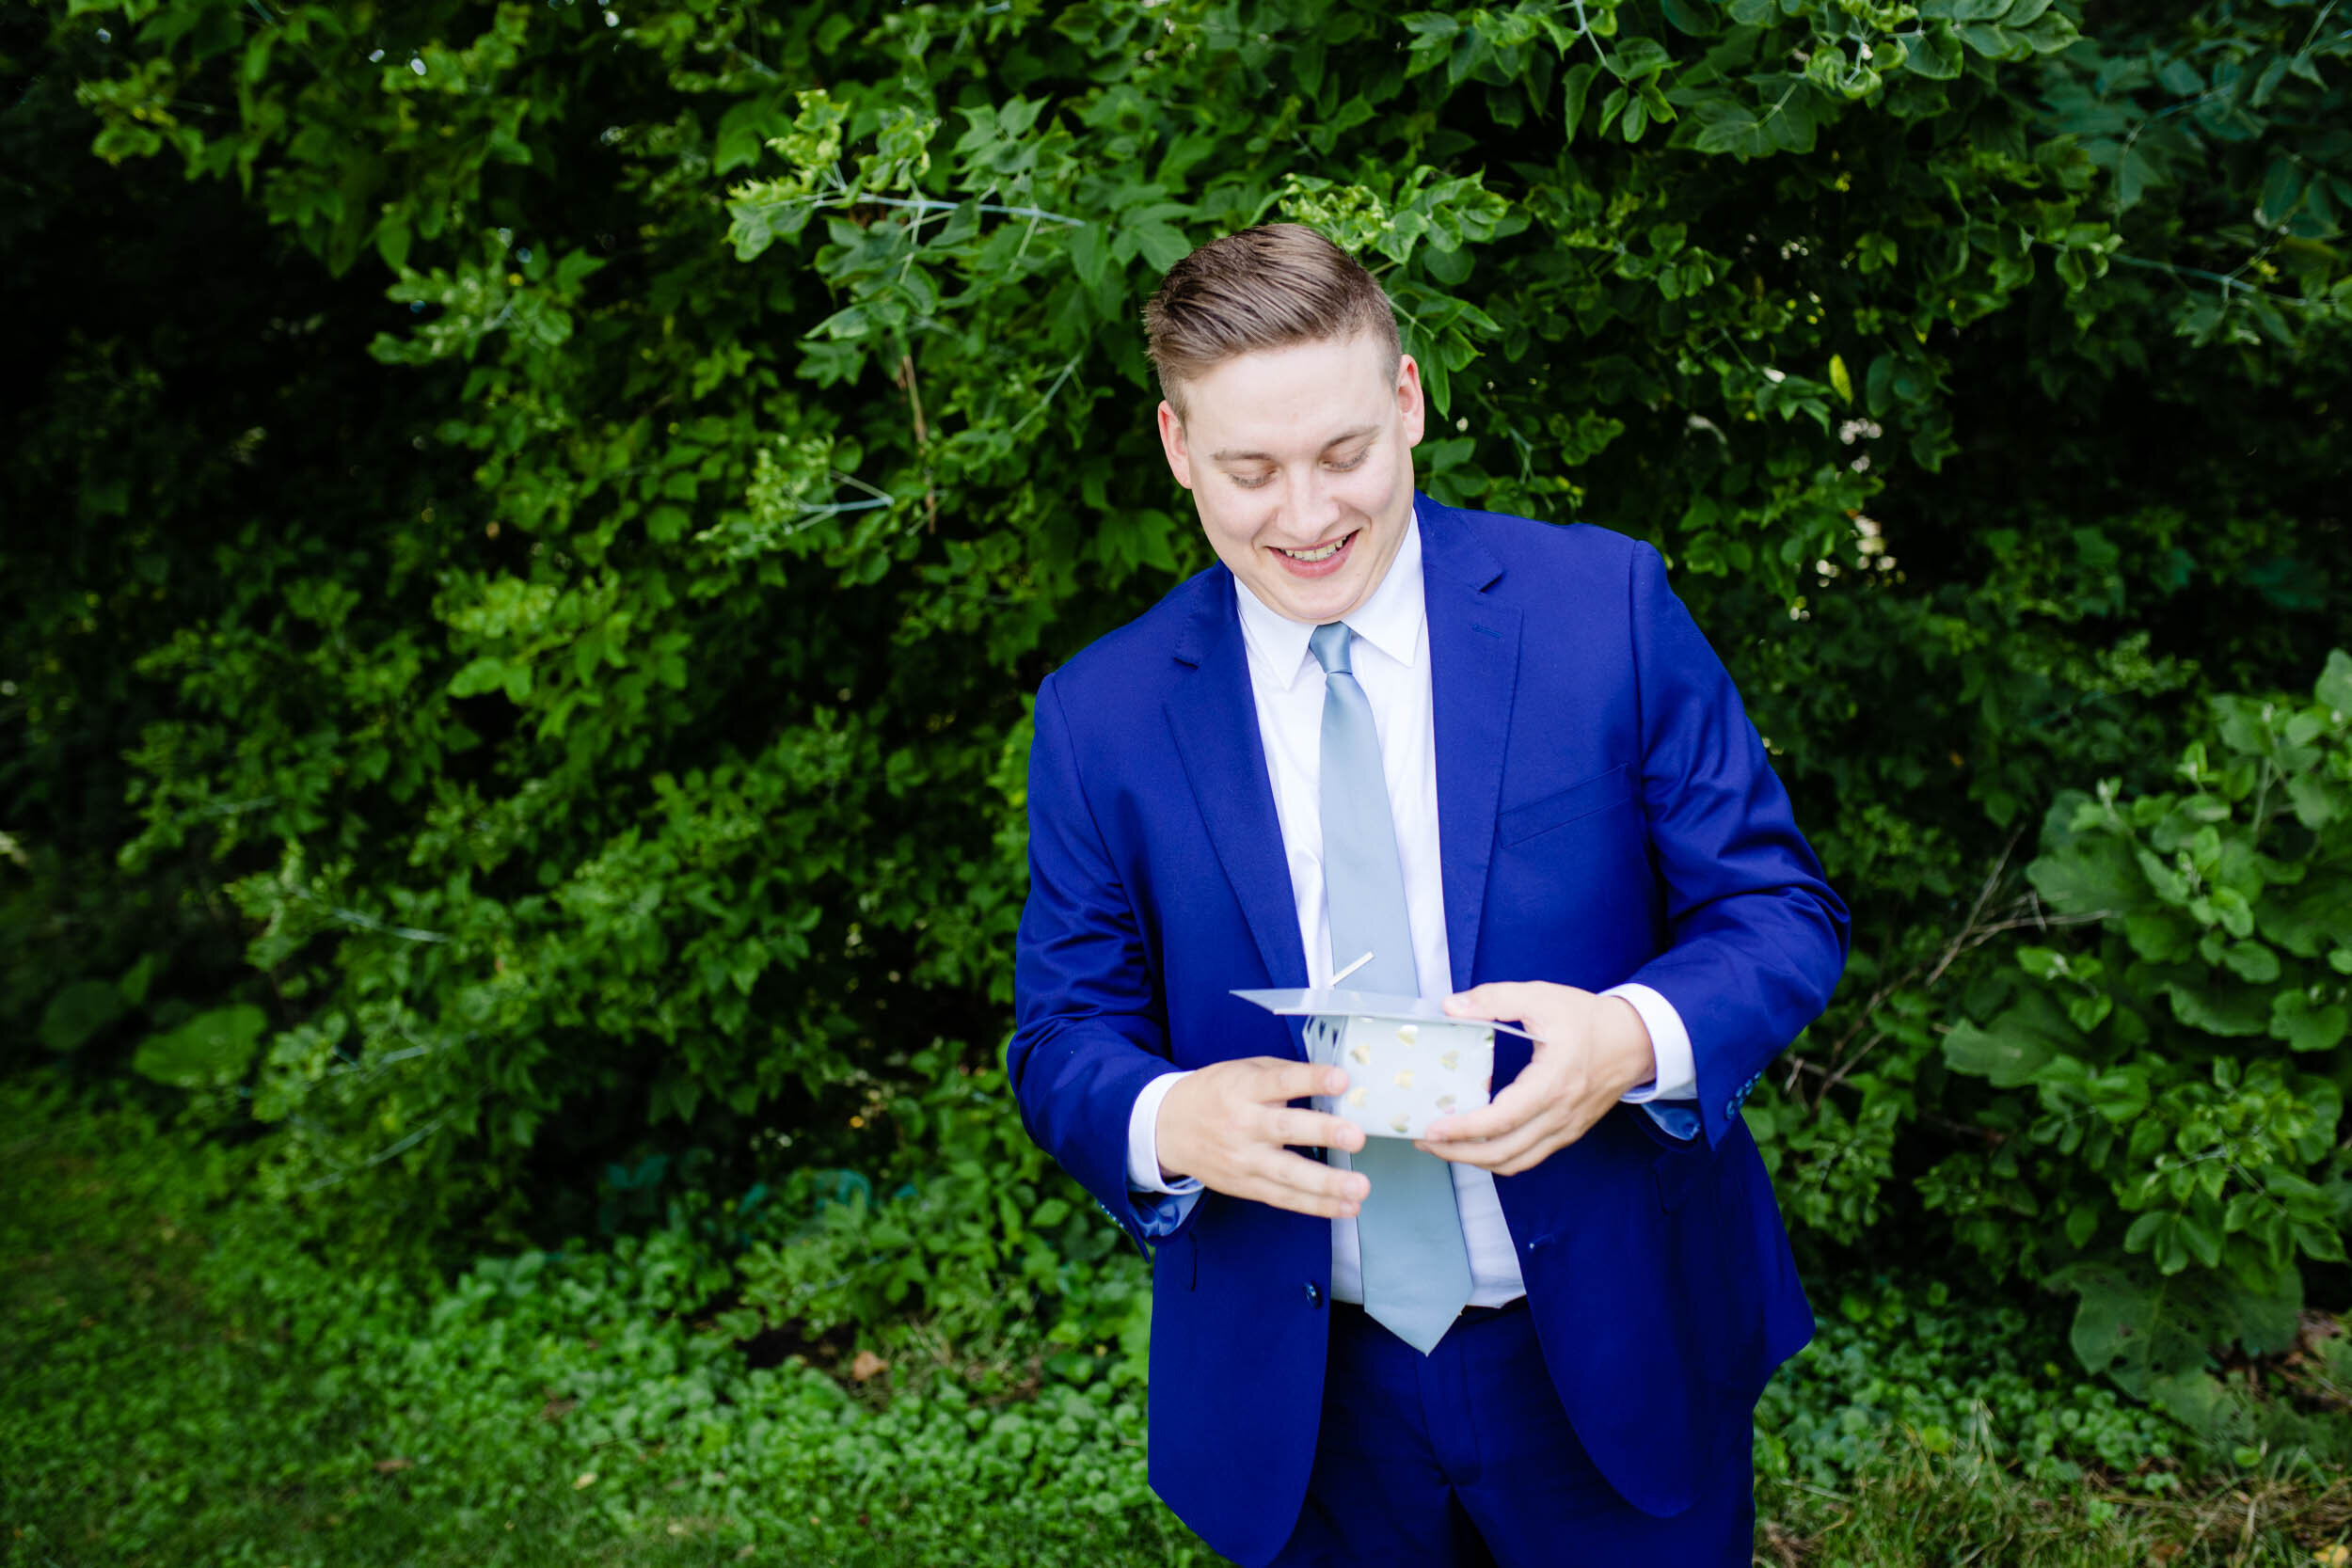 Groom opening his wedding gift:  Chicago backyard wedding photographed by J. Brown Photography.